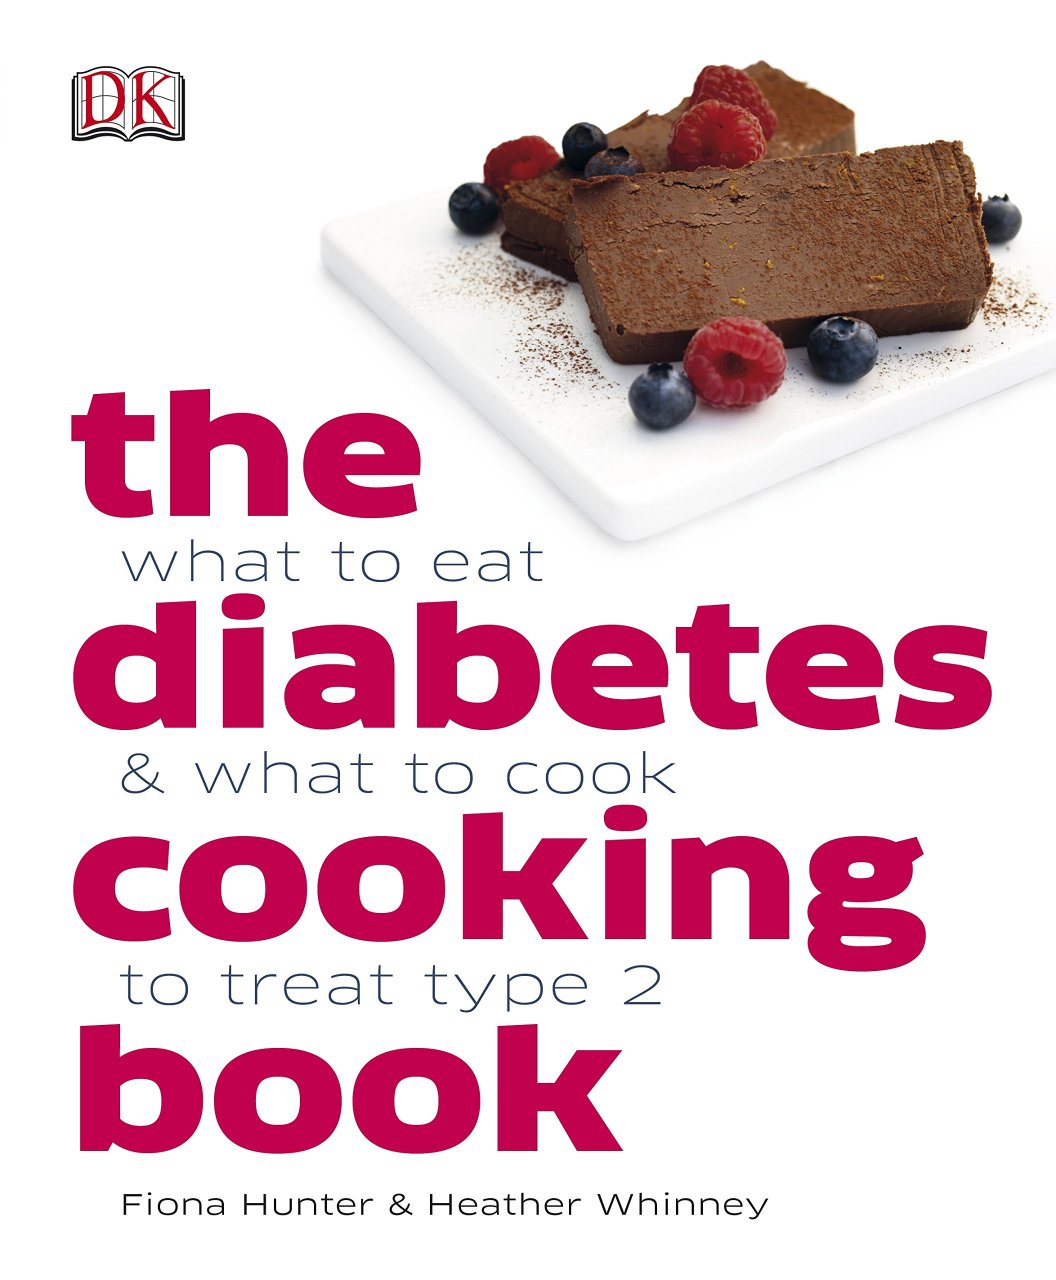 The Diabetes Cooking Book - Heather Whinney, Fiona Hunter